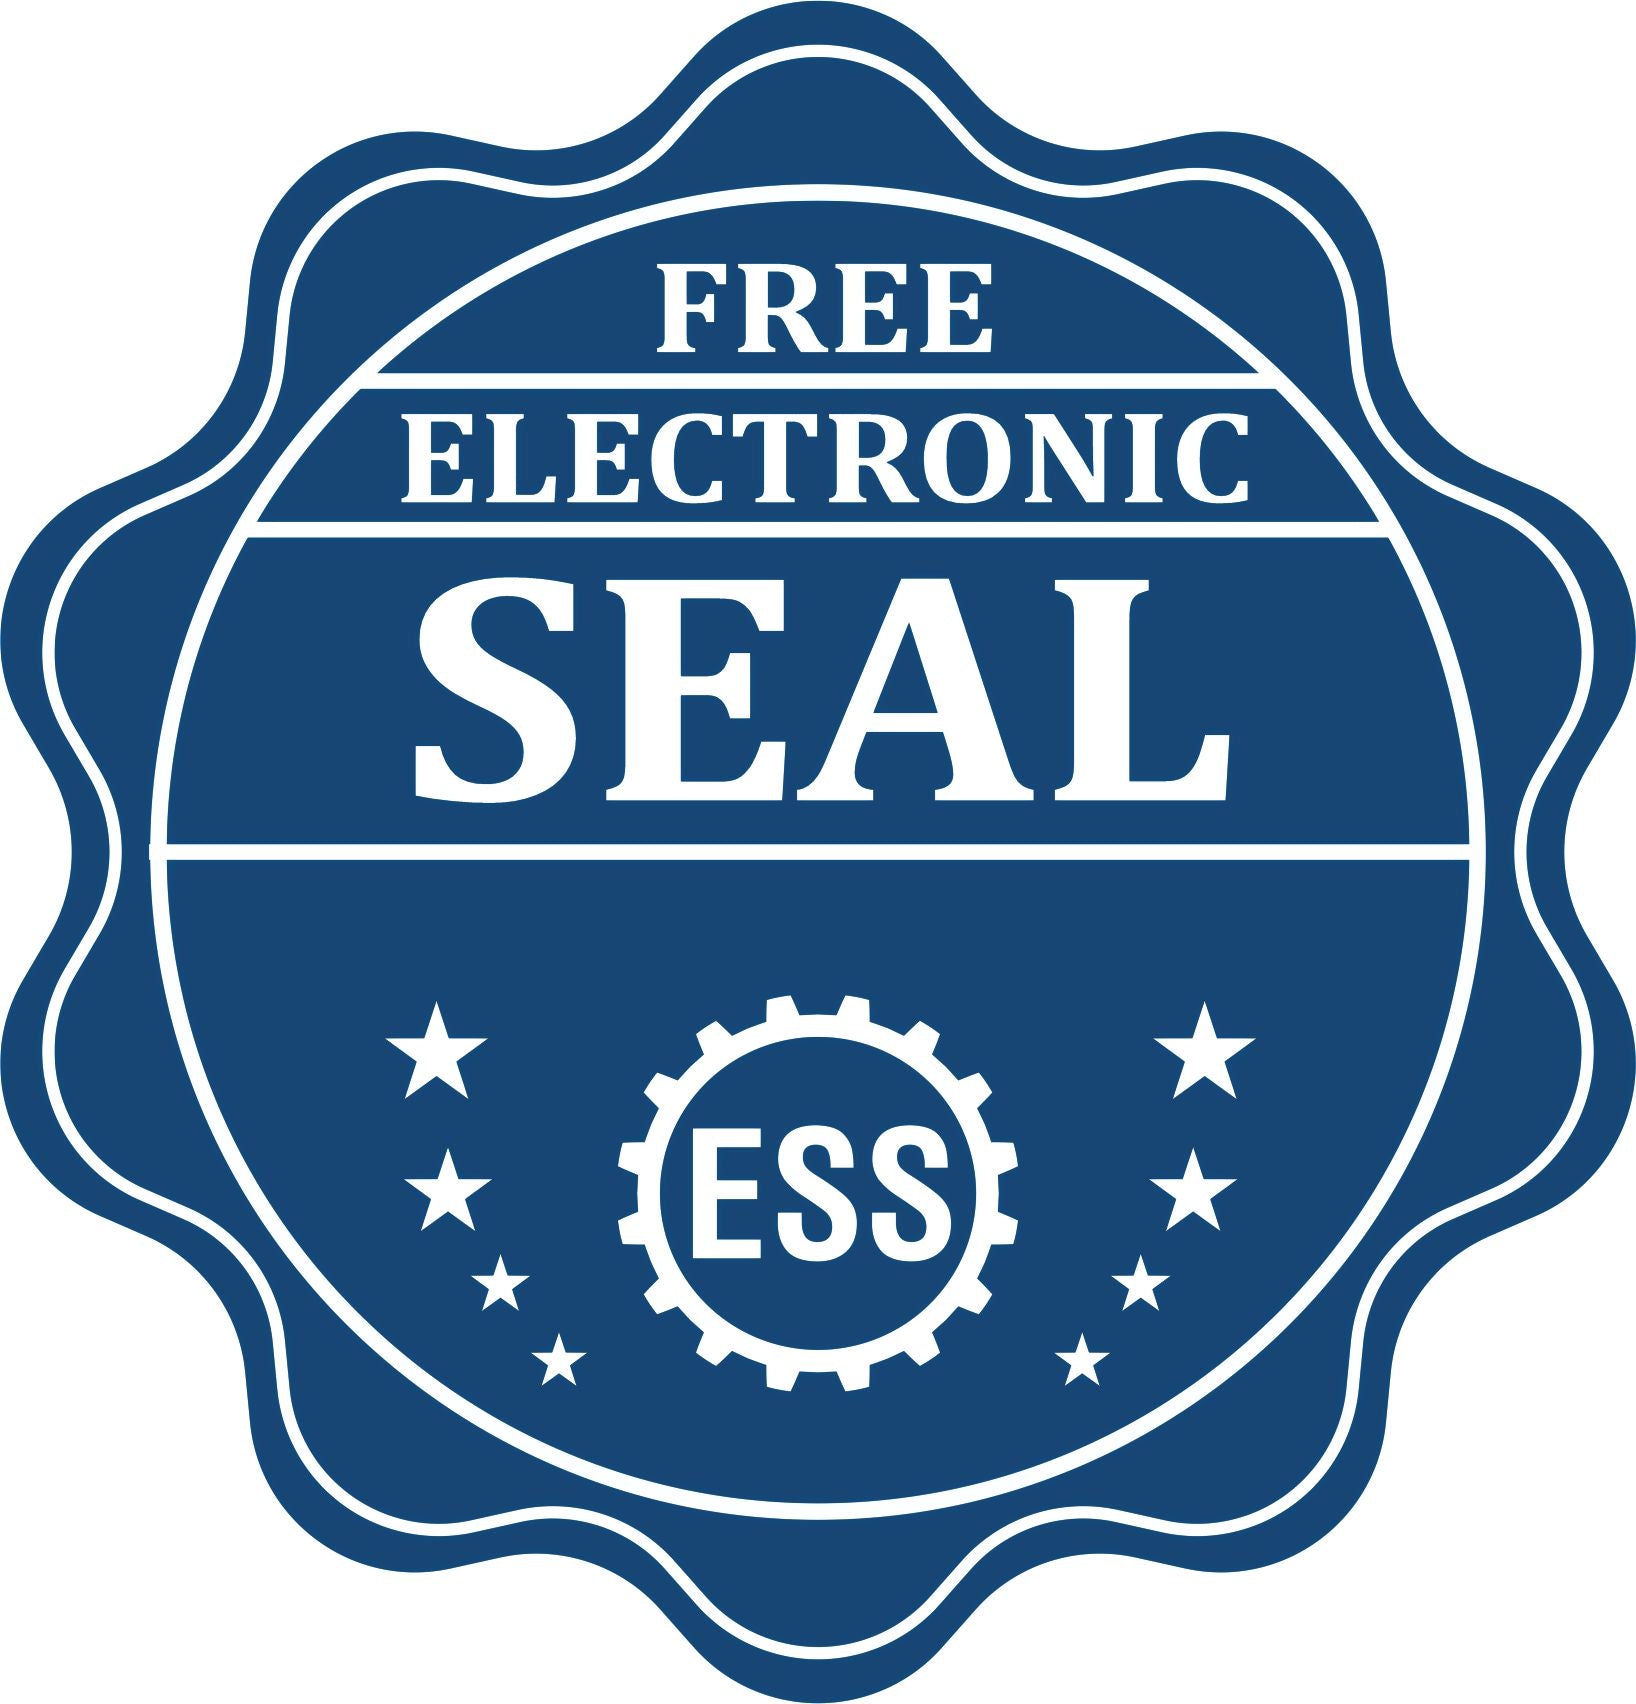 A badge showing a free electronic seal for the Soft New Mexico Professional Engineer Seal with stars and the ESS gear on the emblem.